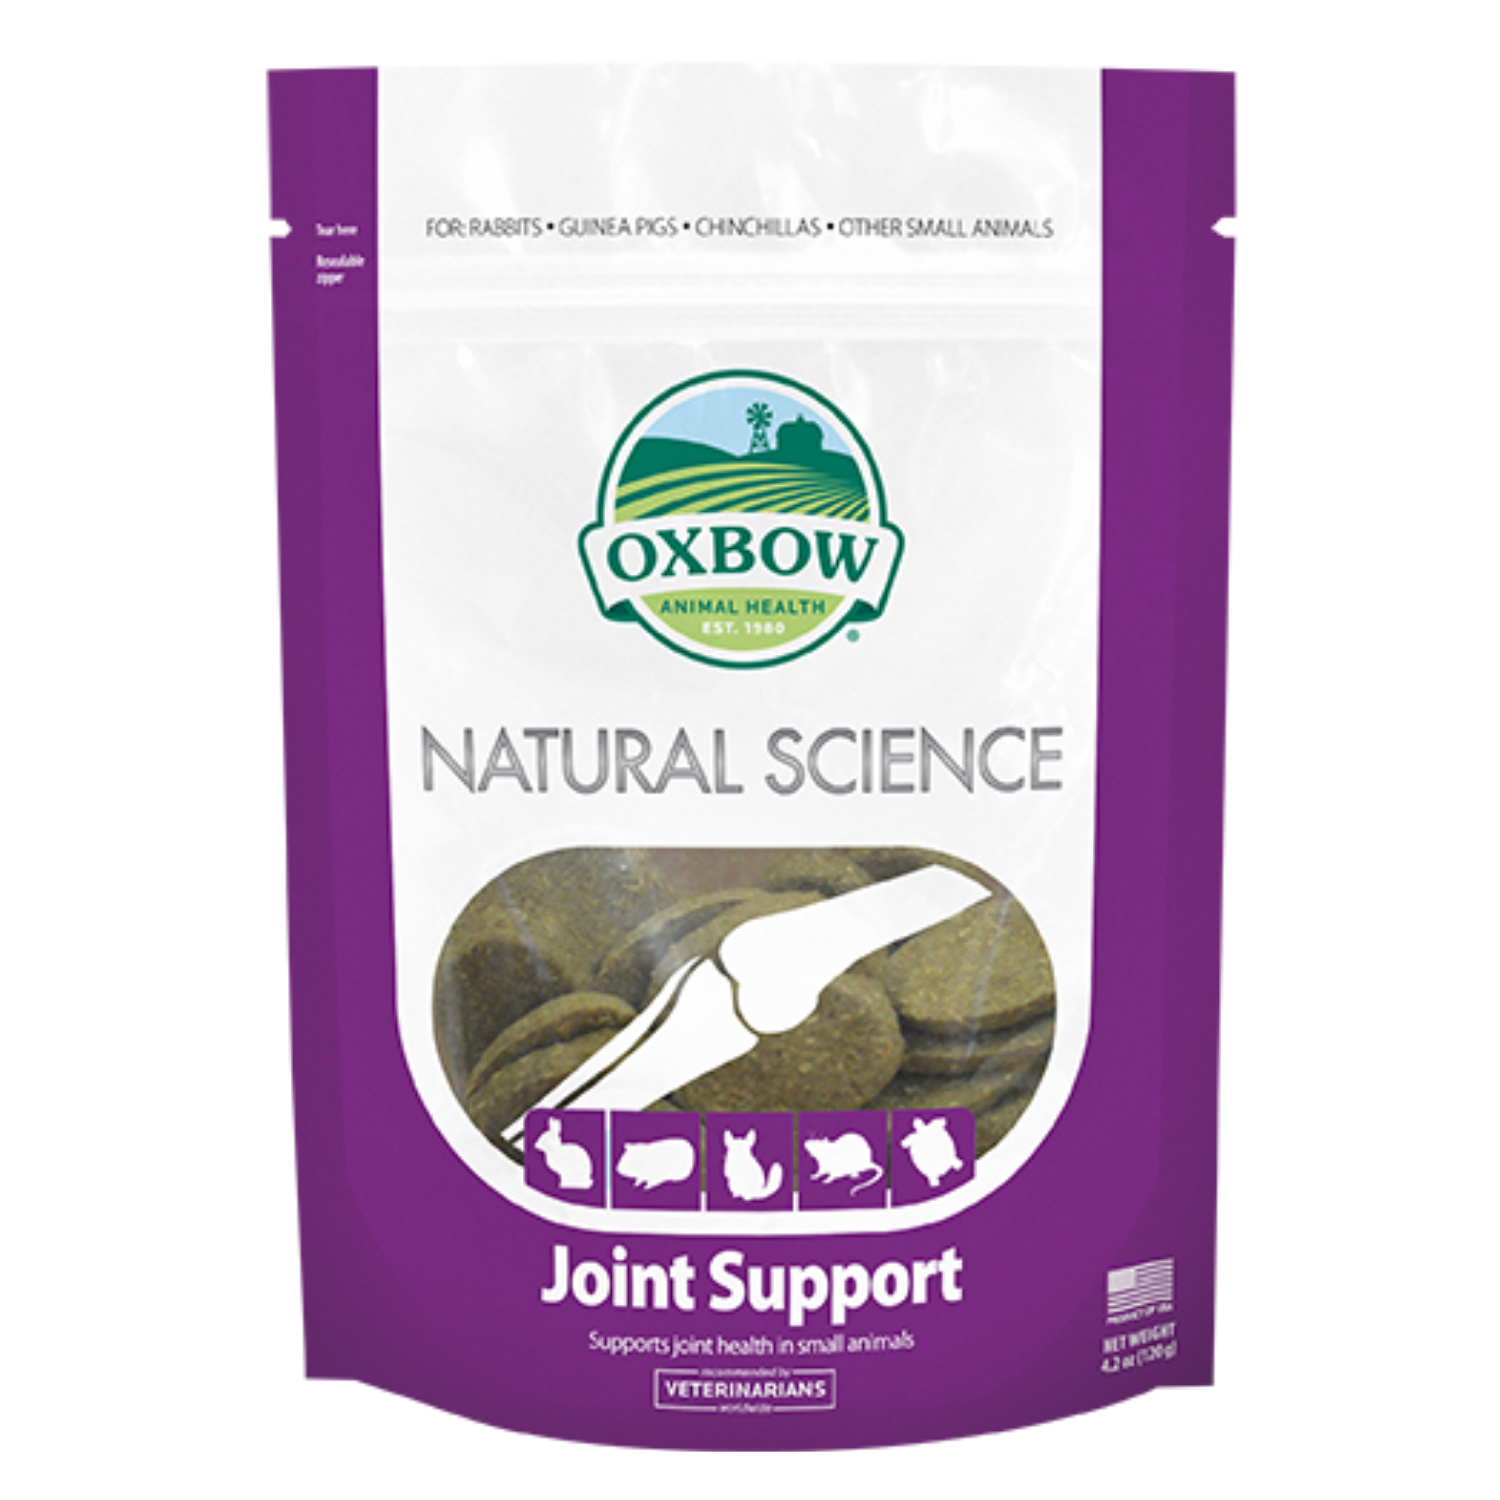 Oxbow Natural Science Joint Support - 120g